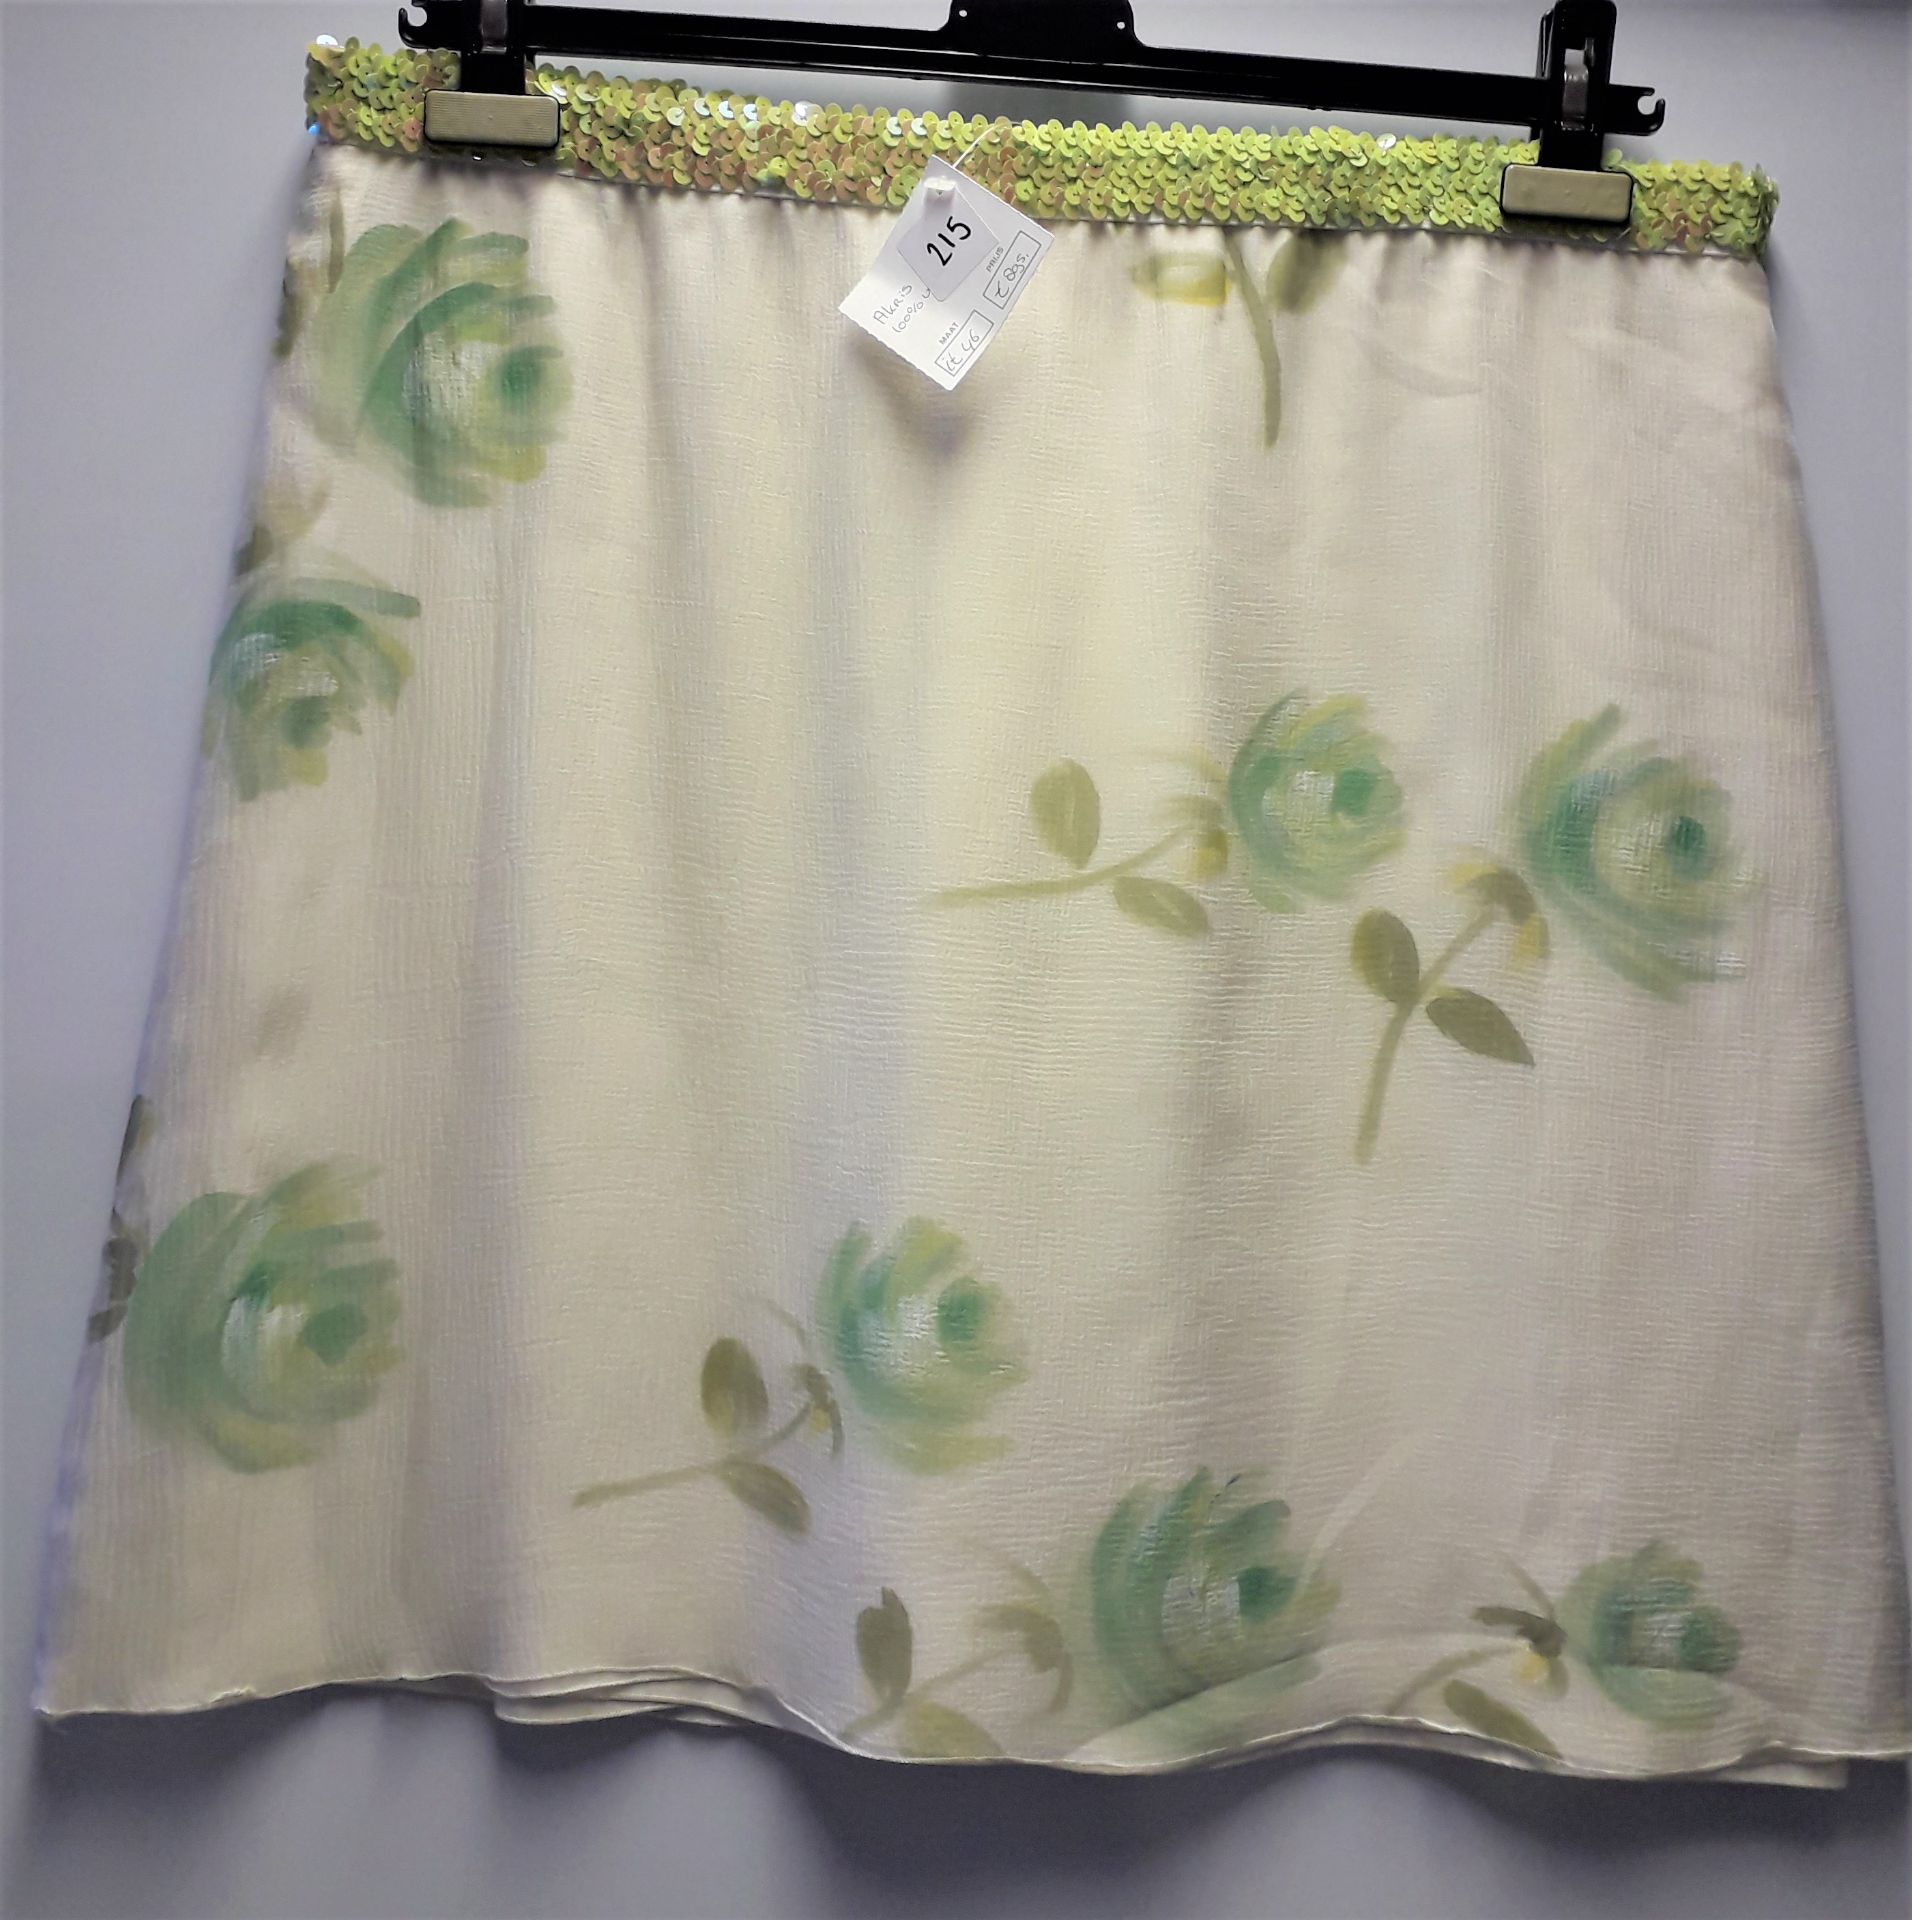 1 x Boutique Le Duc Cream Floral Skirt With Sequin Waistband - Size: 14 - Material: 100% Voilesoie - - Image 2 of 7